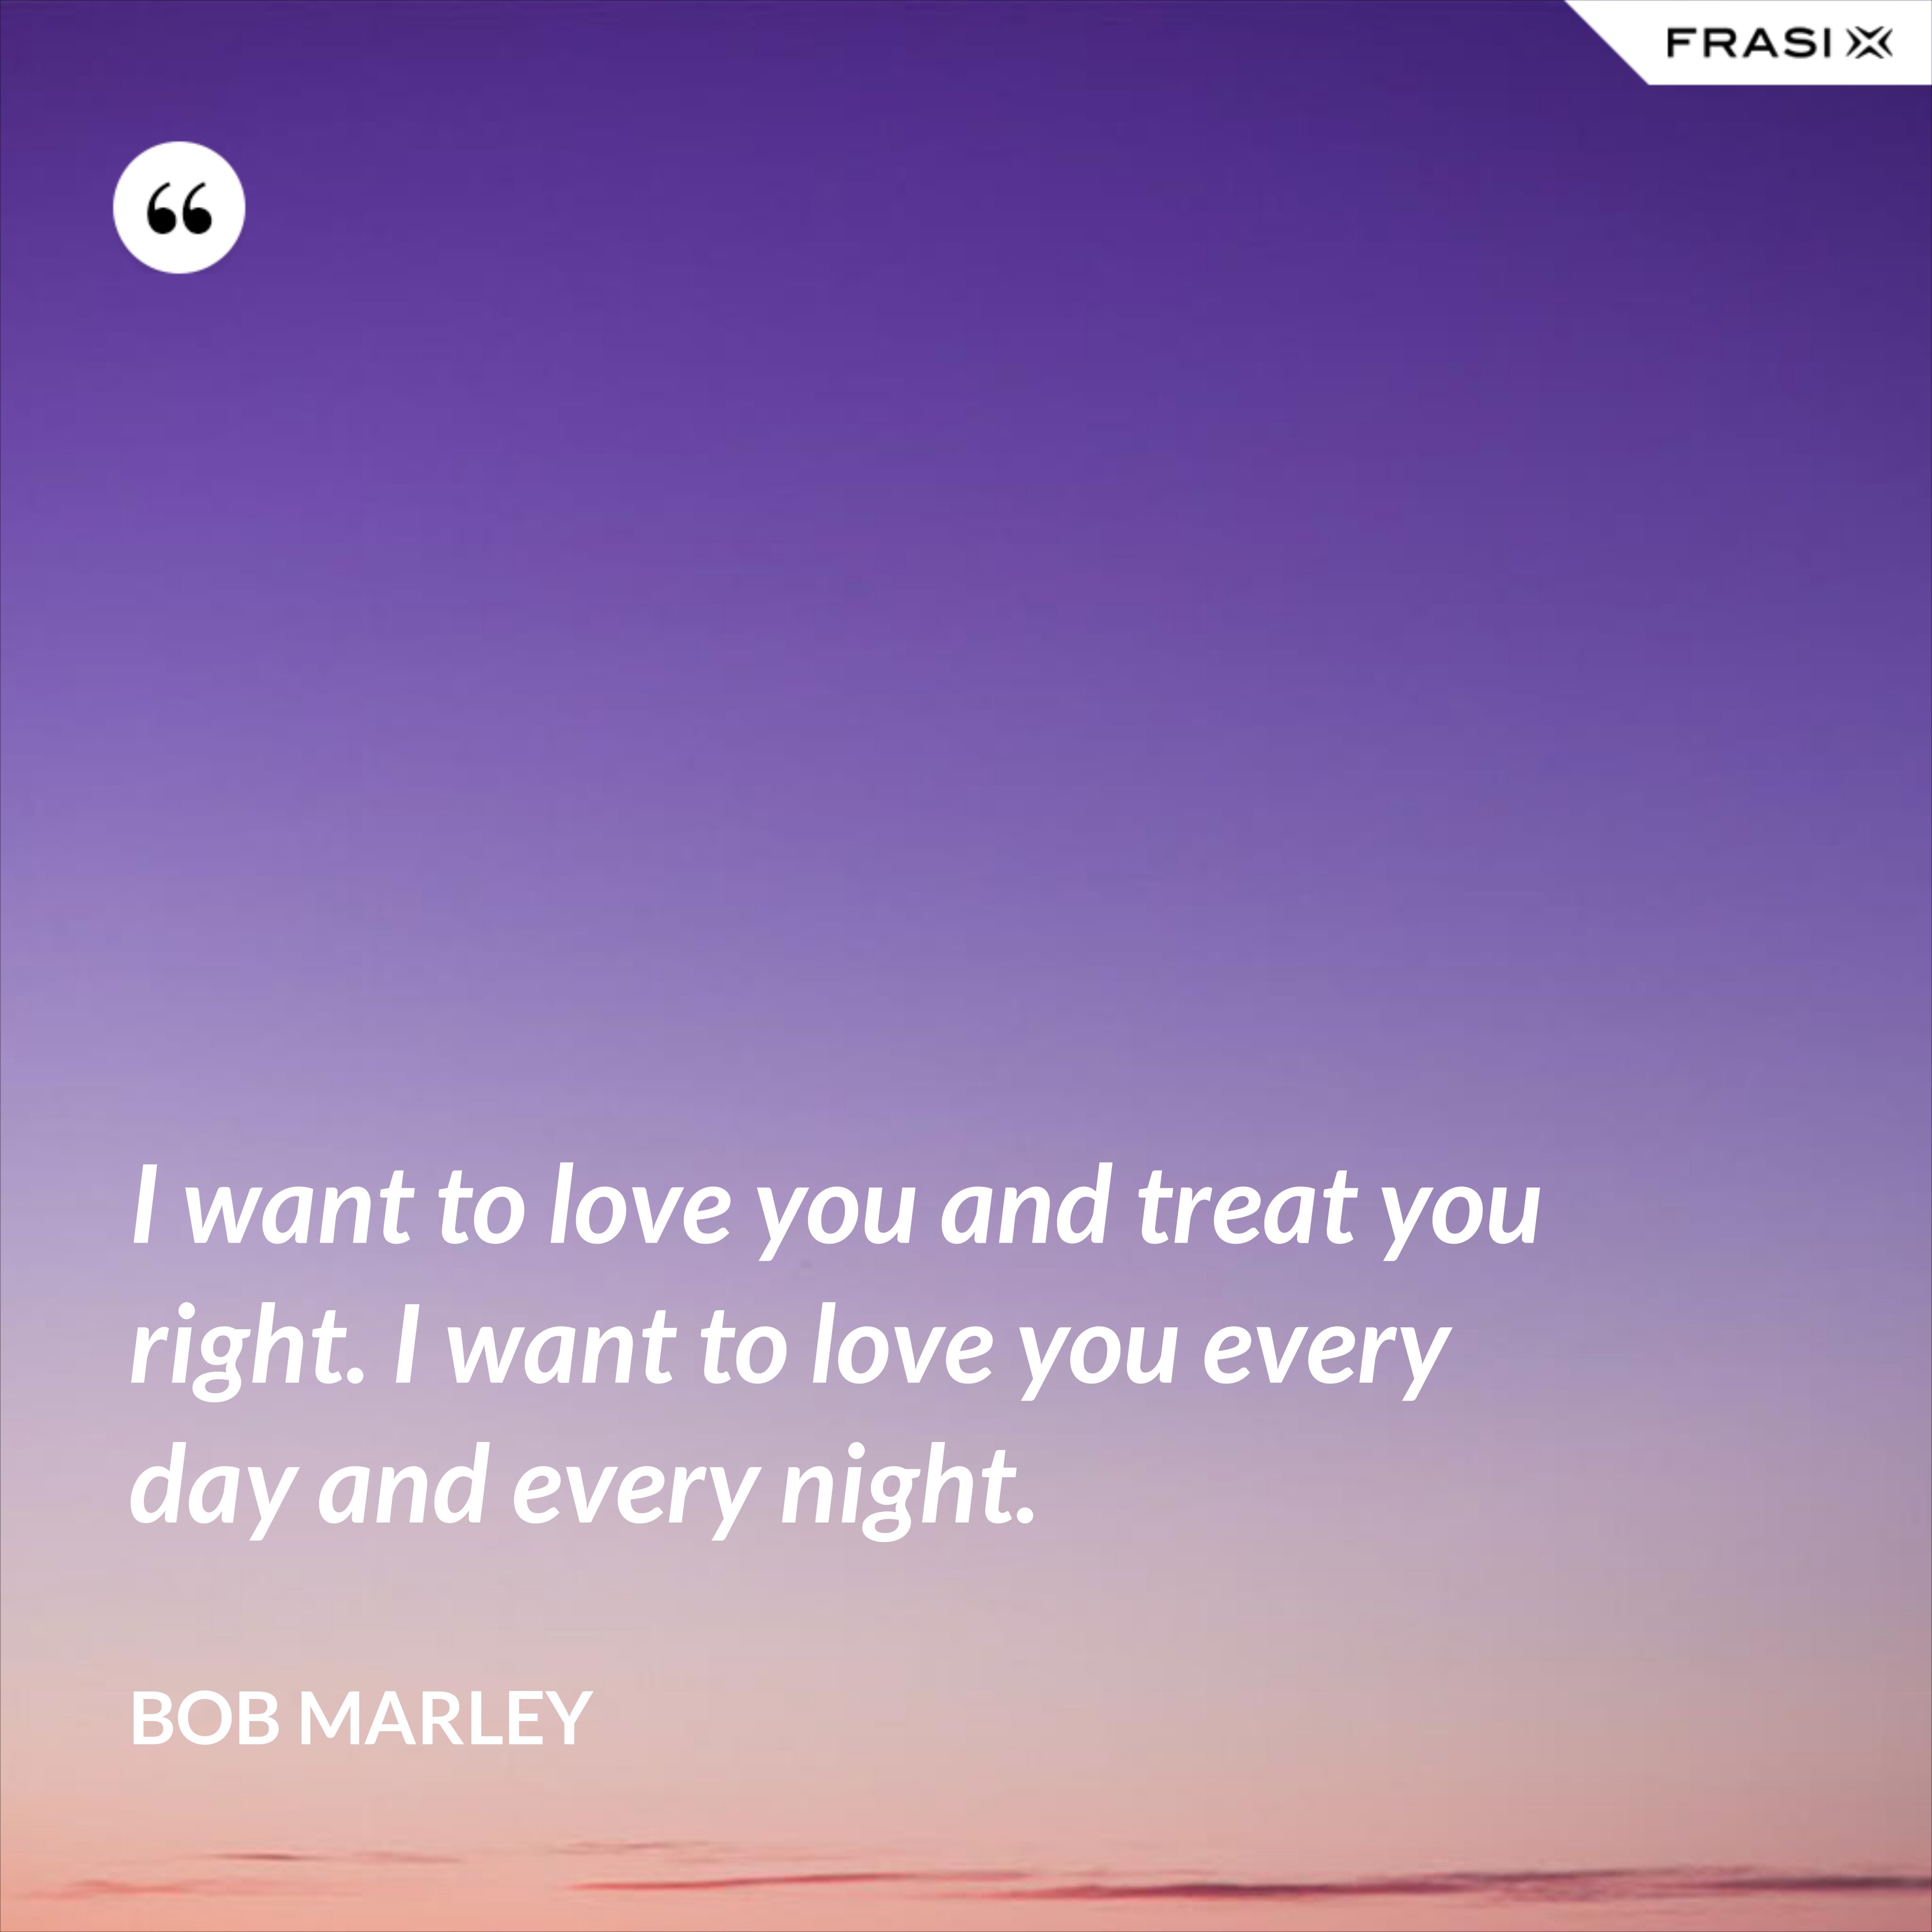 I want to love you and treat you right. I want to love you every day and every night. - Bob Marley